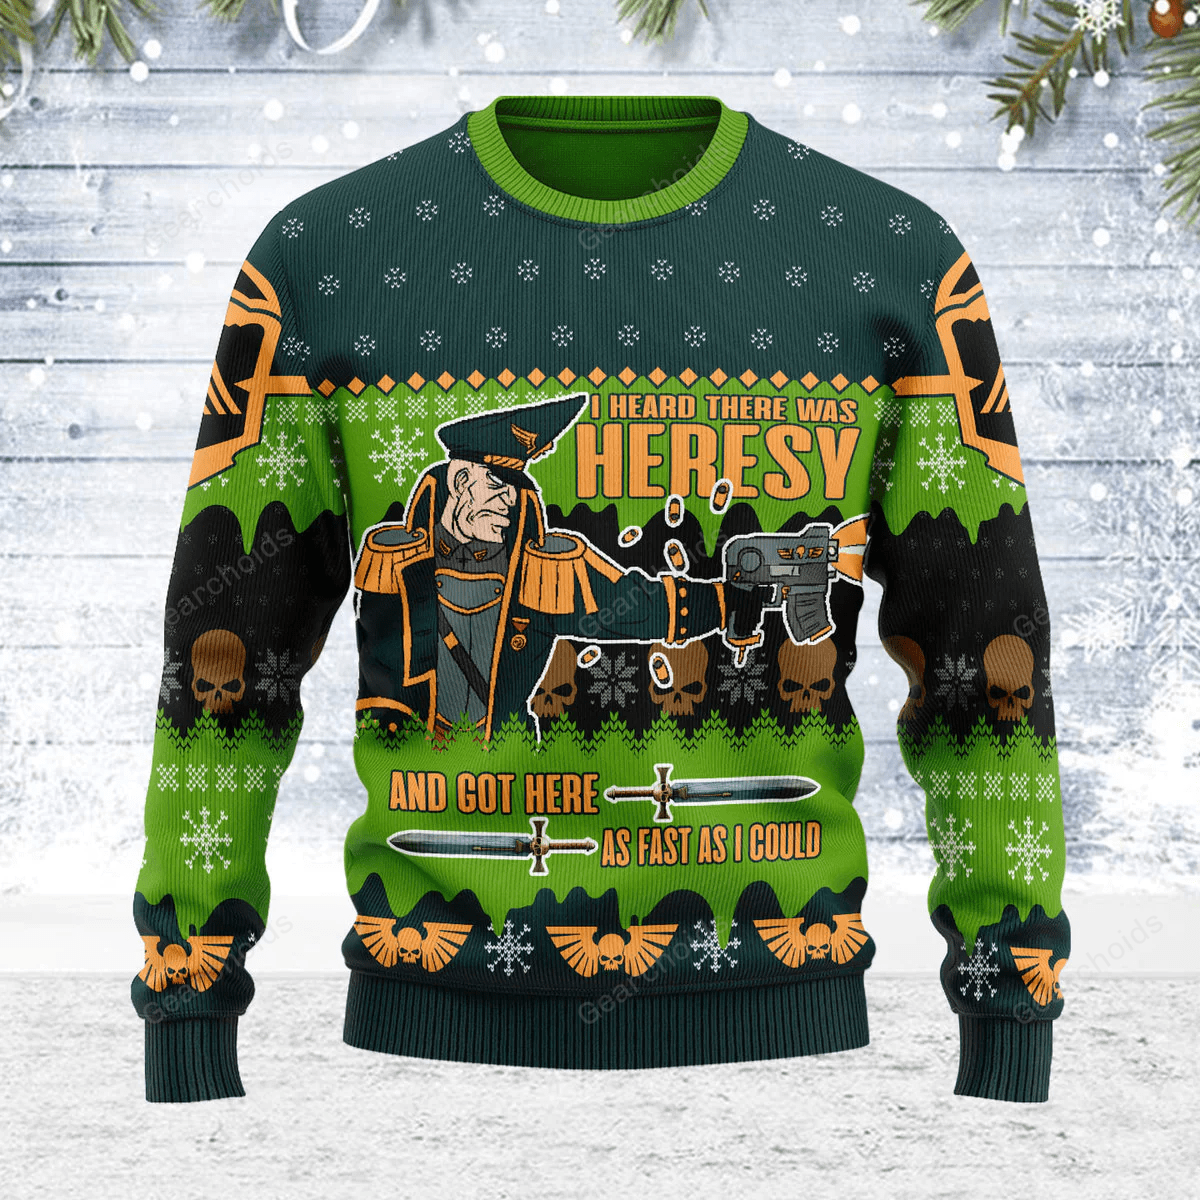 Colonel Commissar Ibram Gaunt Iconic - Ugly Christmas Sweater